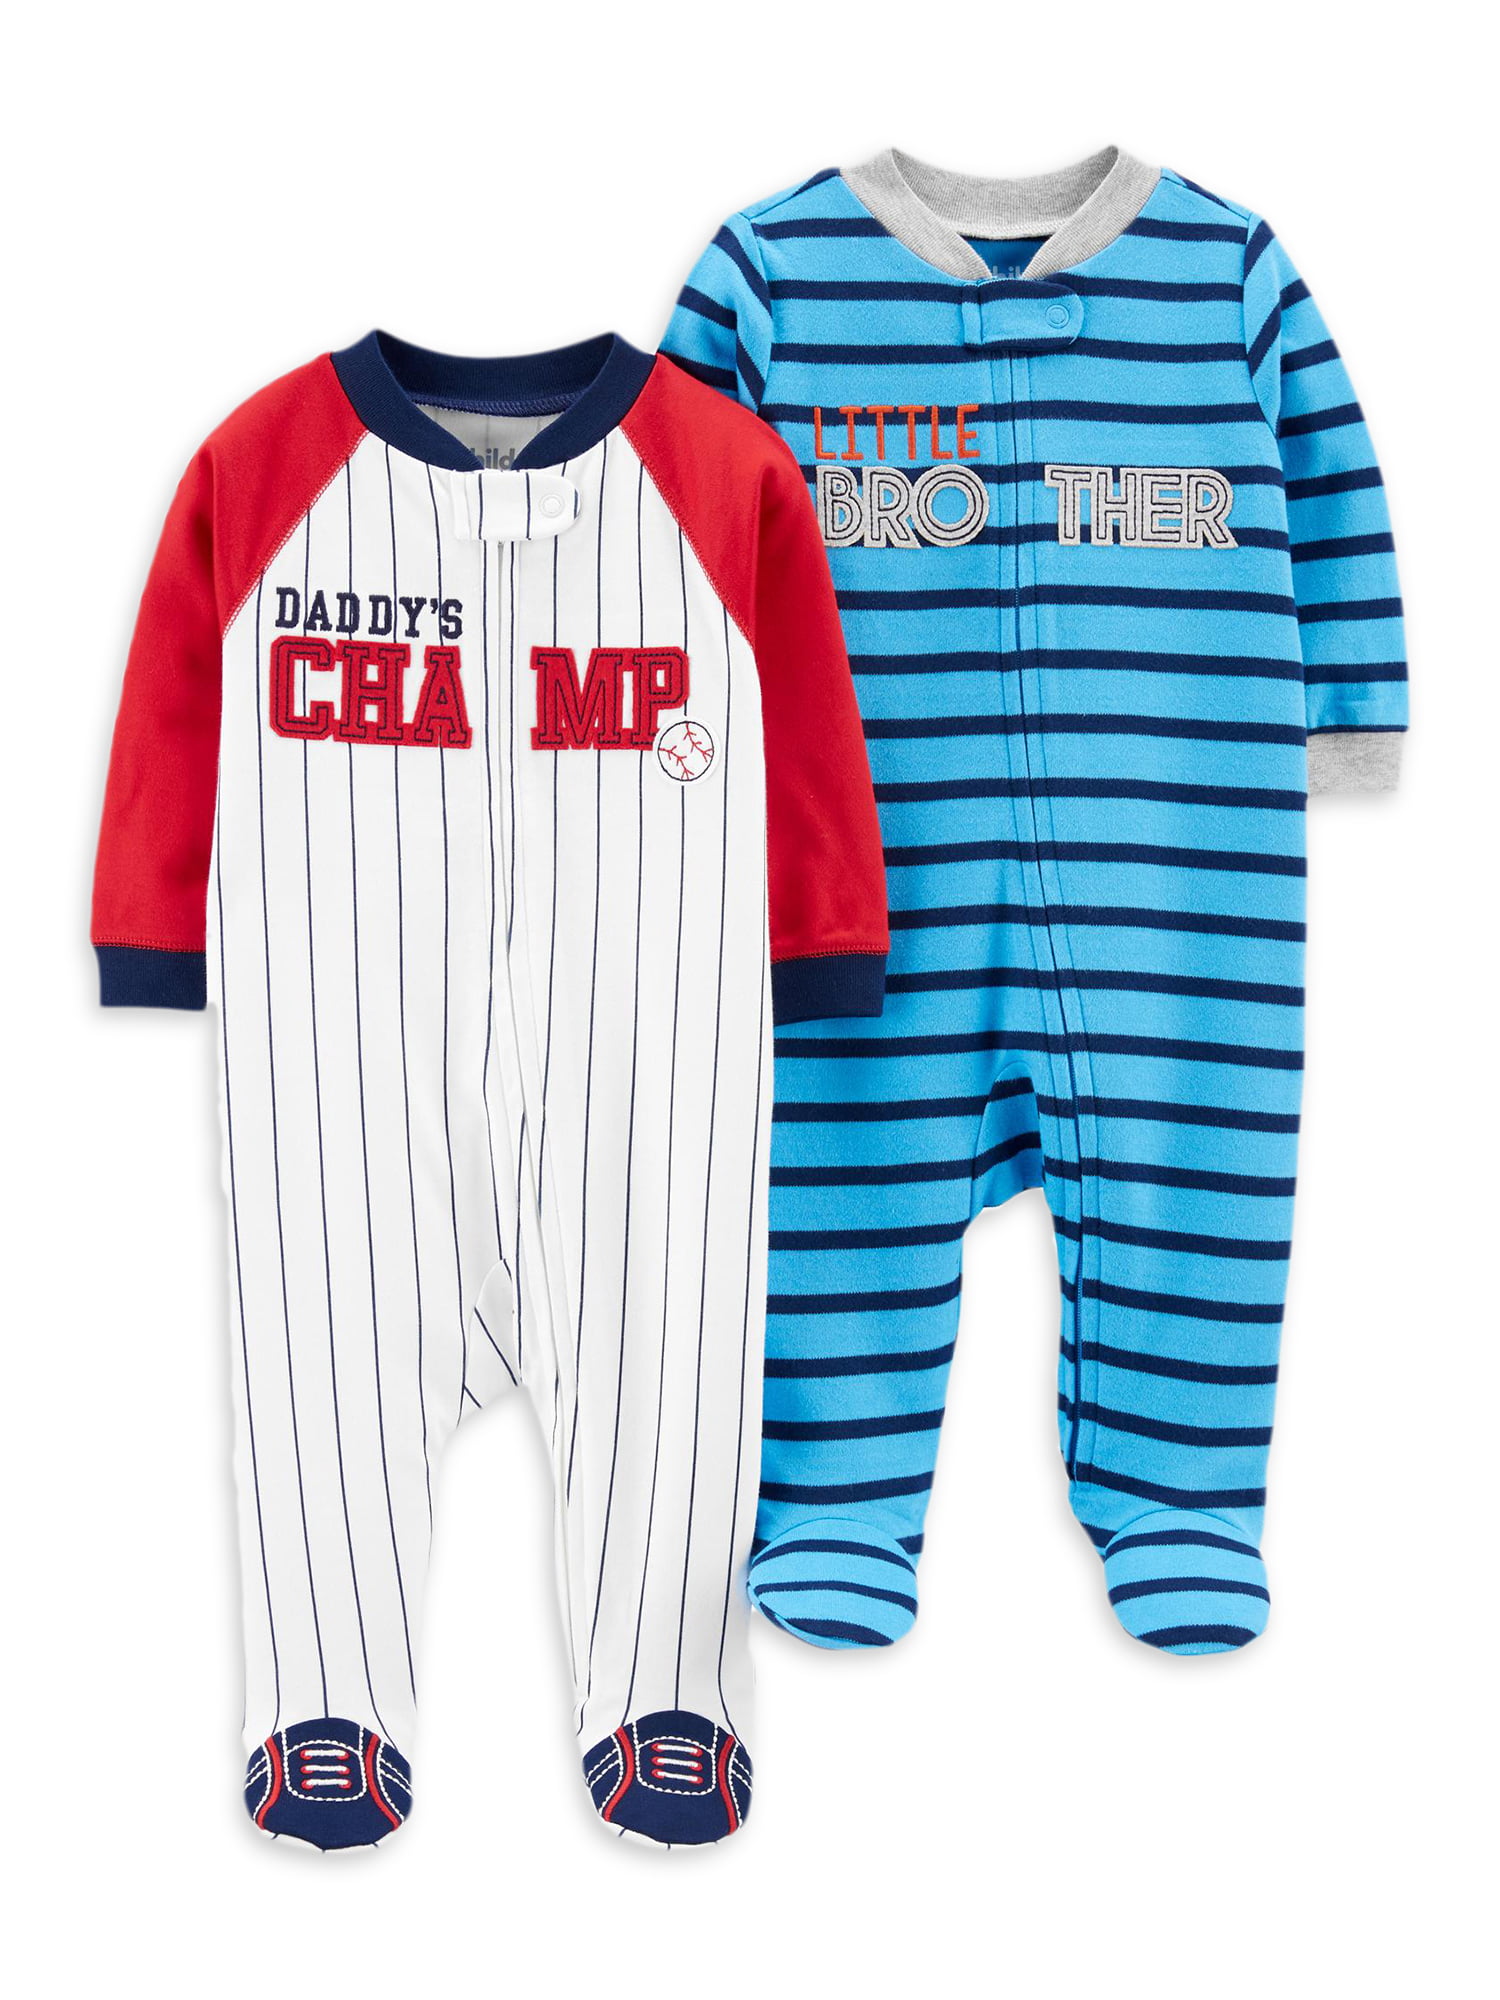 Simple Joys by Carters Baby Boys 2-Pack Cotton Footed Sleep and Play Preemie Monkey/Vehicles